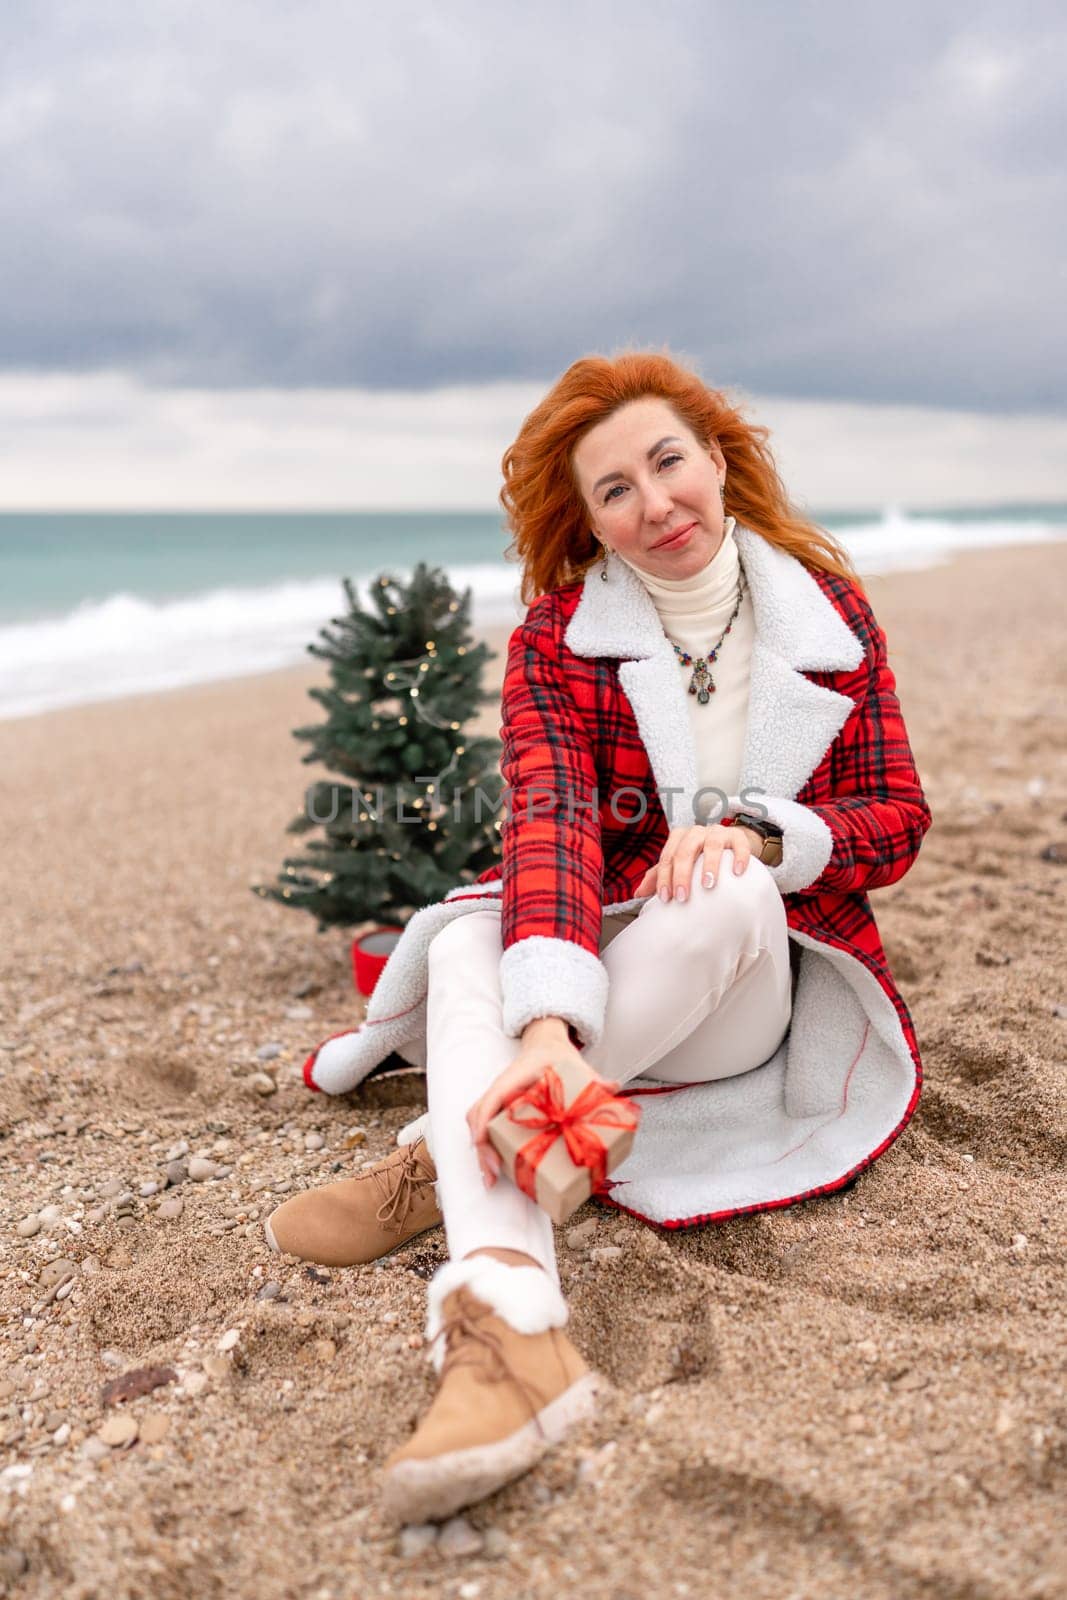 Lady in plaid shirt holding a gift in his hands enjoys beach with Christmas tree. Coastal area. Christmas, New Year holidays concep by Matiunina